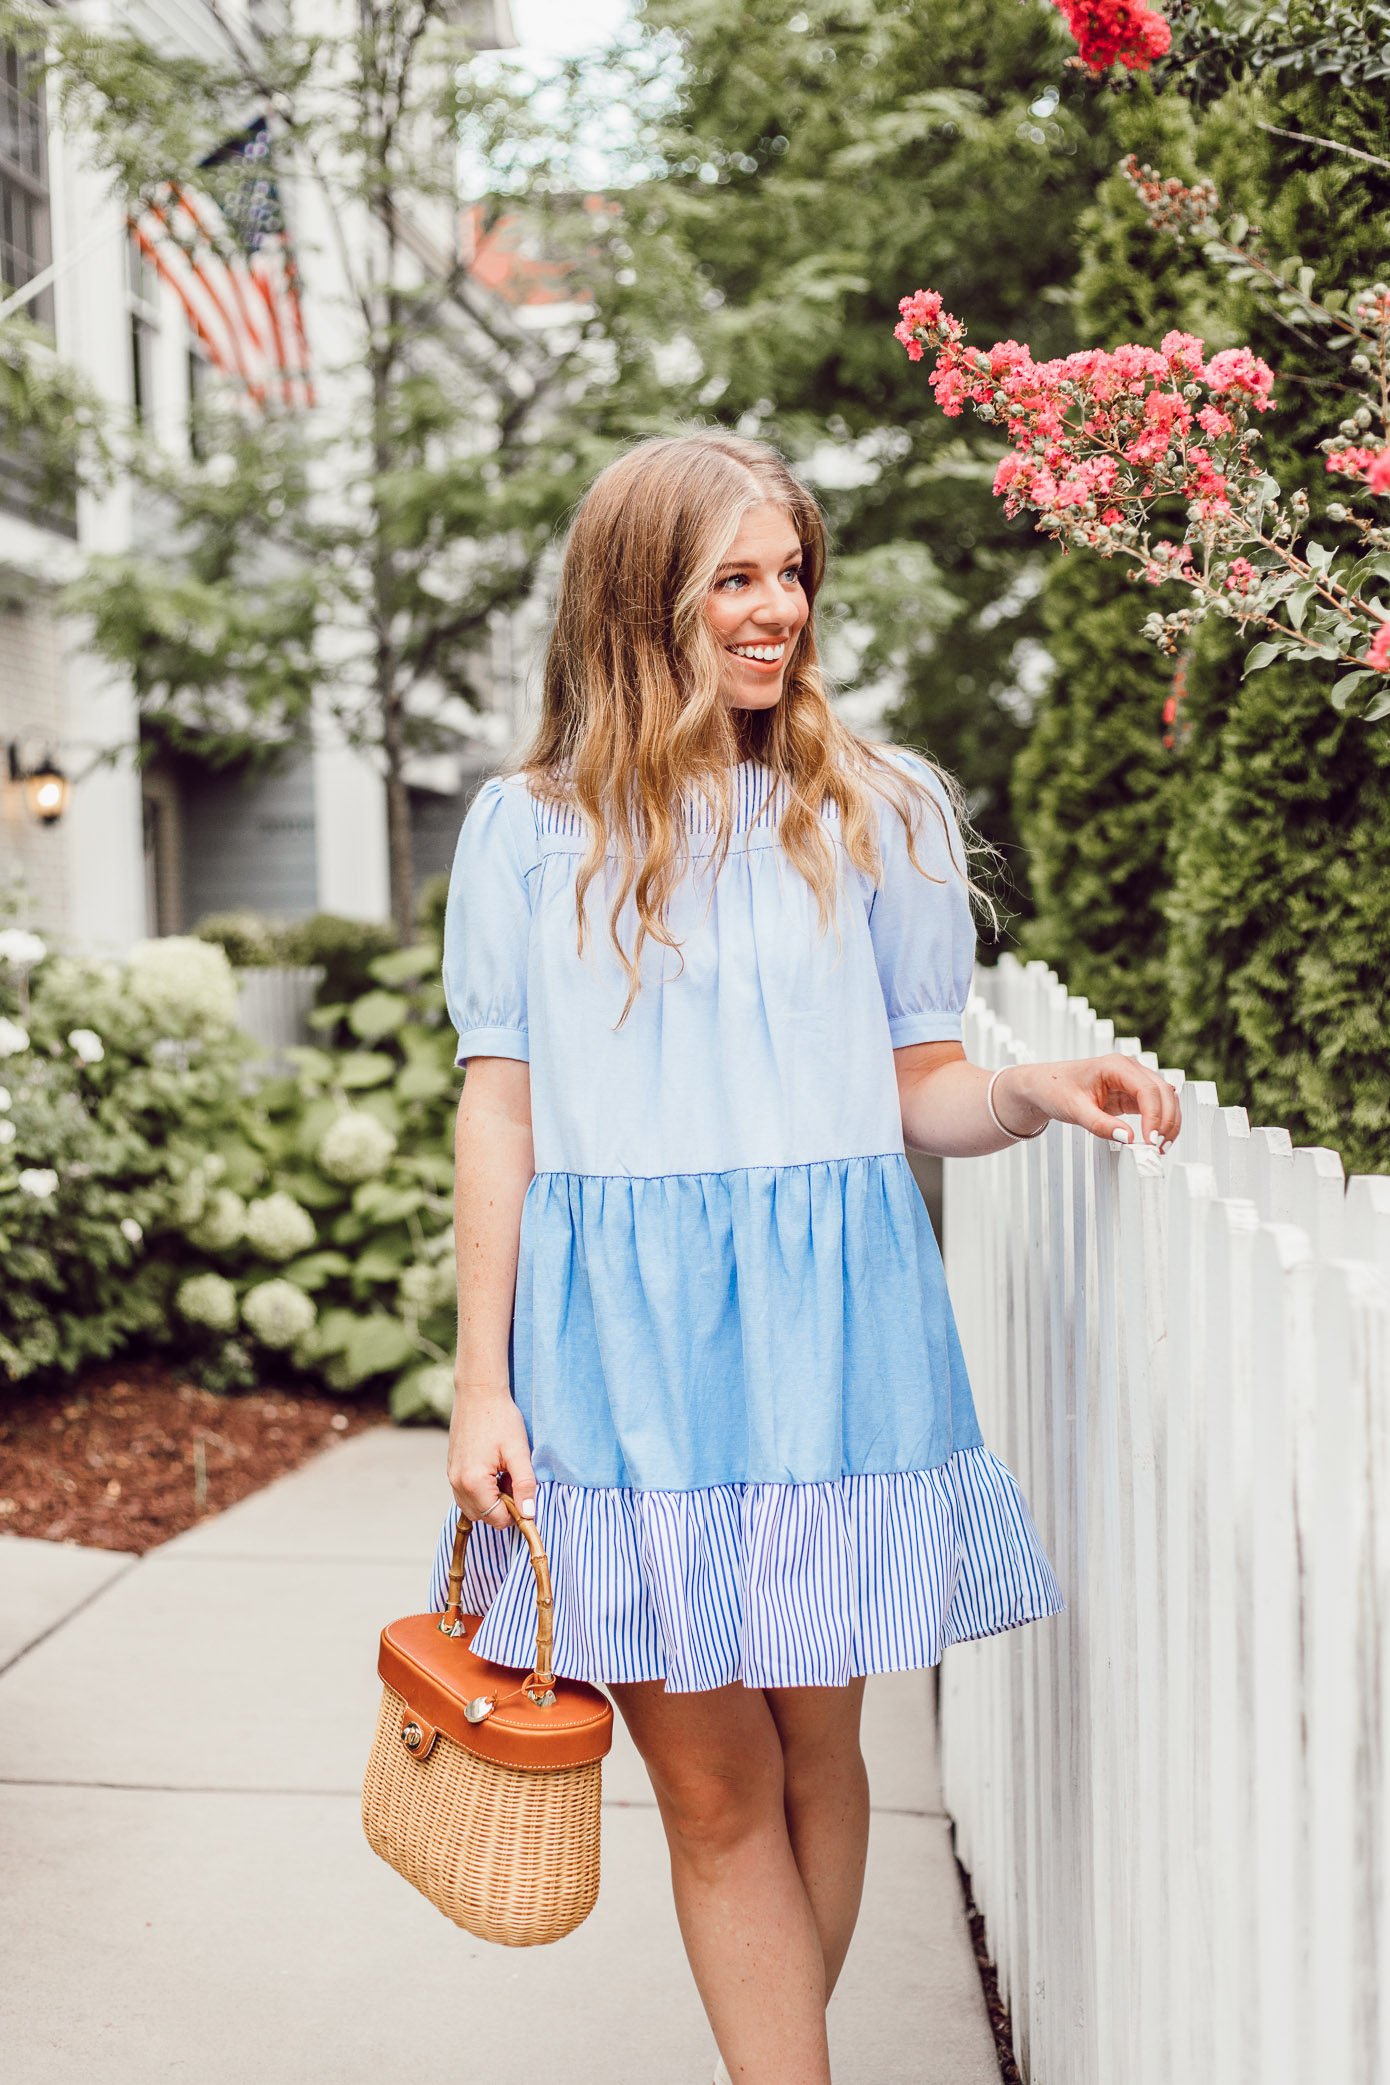 English Factory Summer Dress in Charlotte, NC // Blue and White Dress for Summer, Structured Basket Bag | Louella Reese